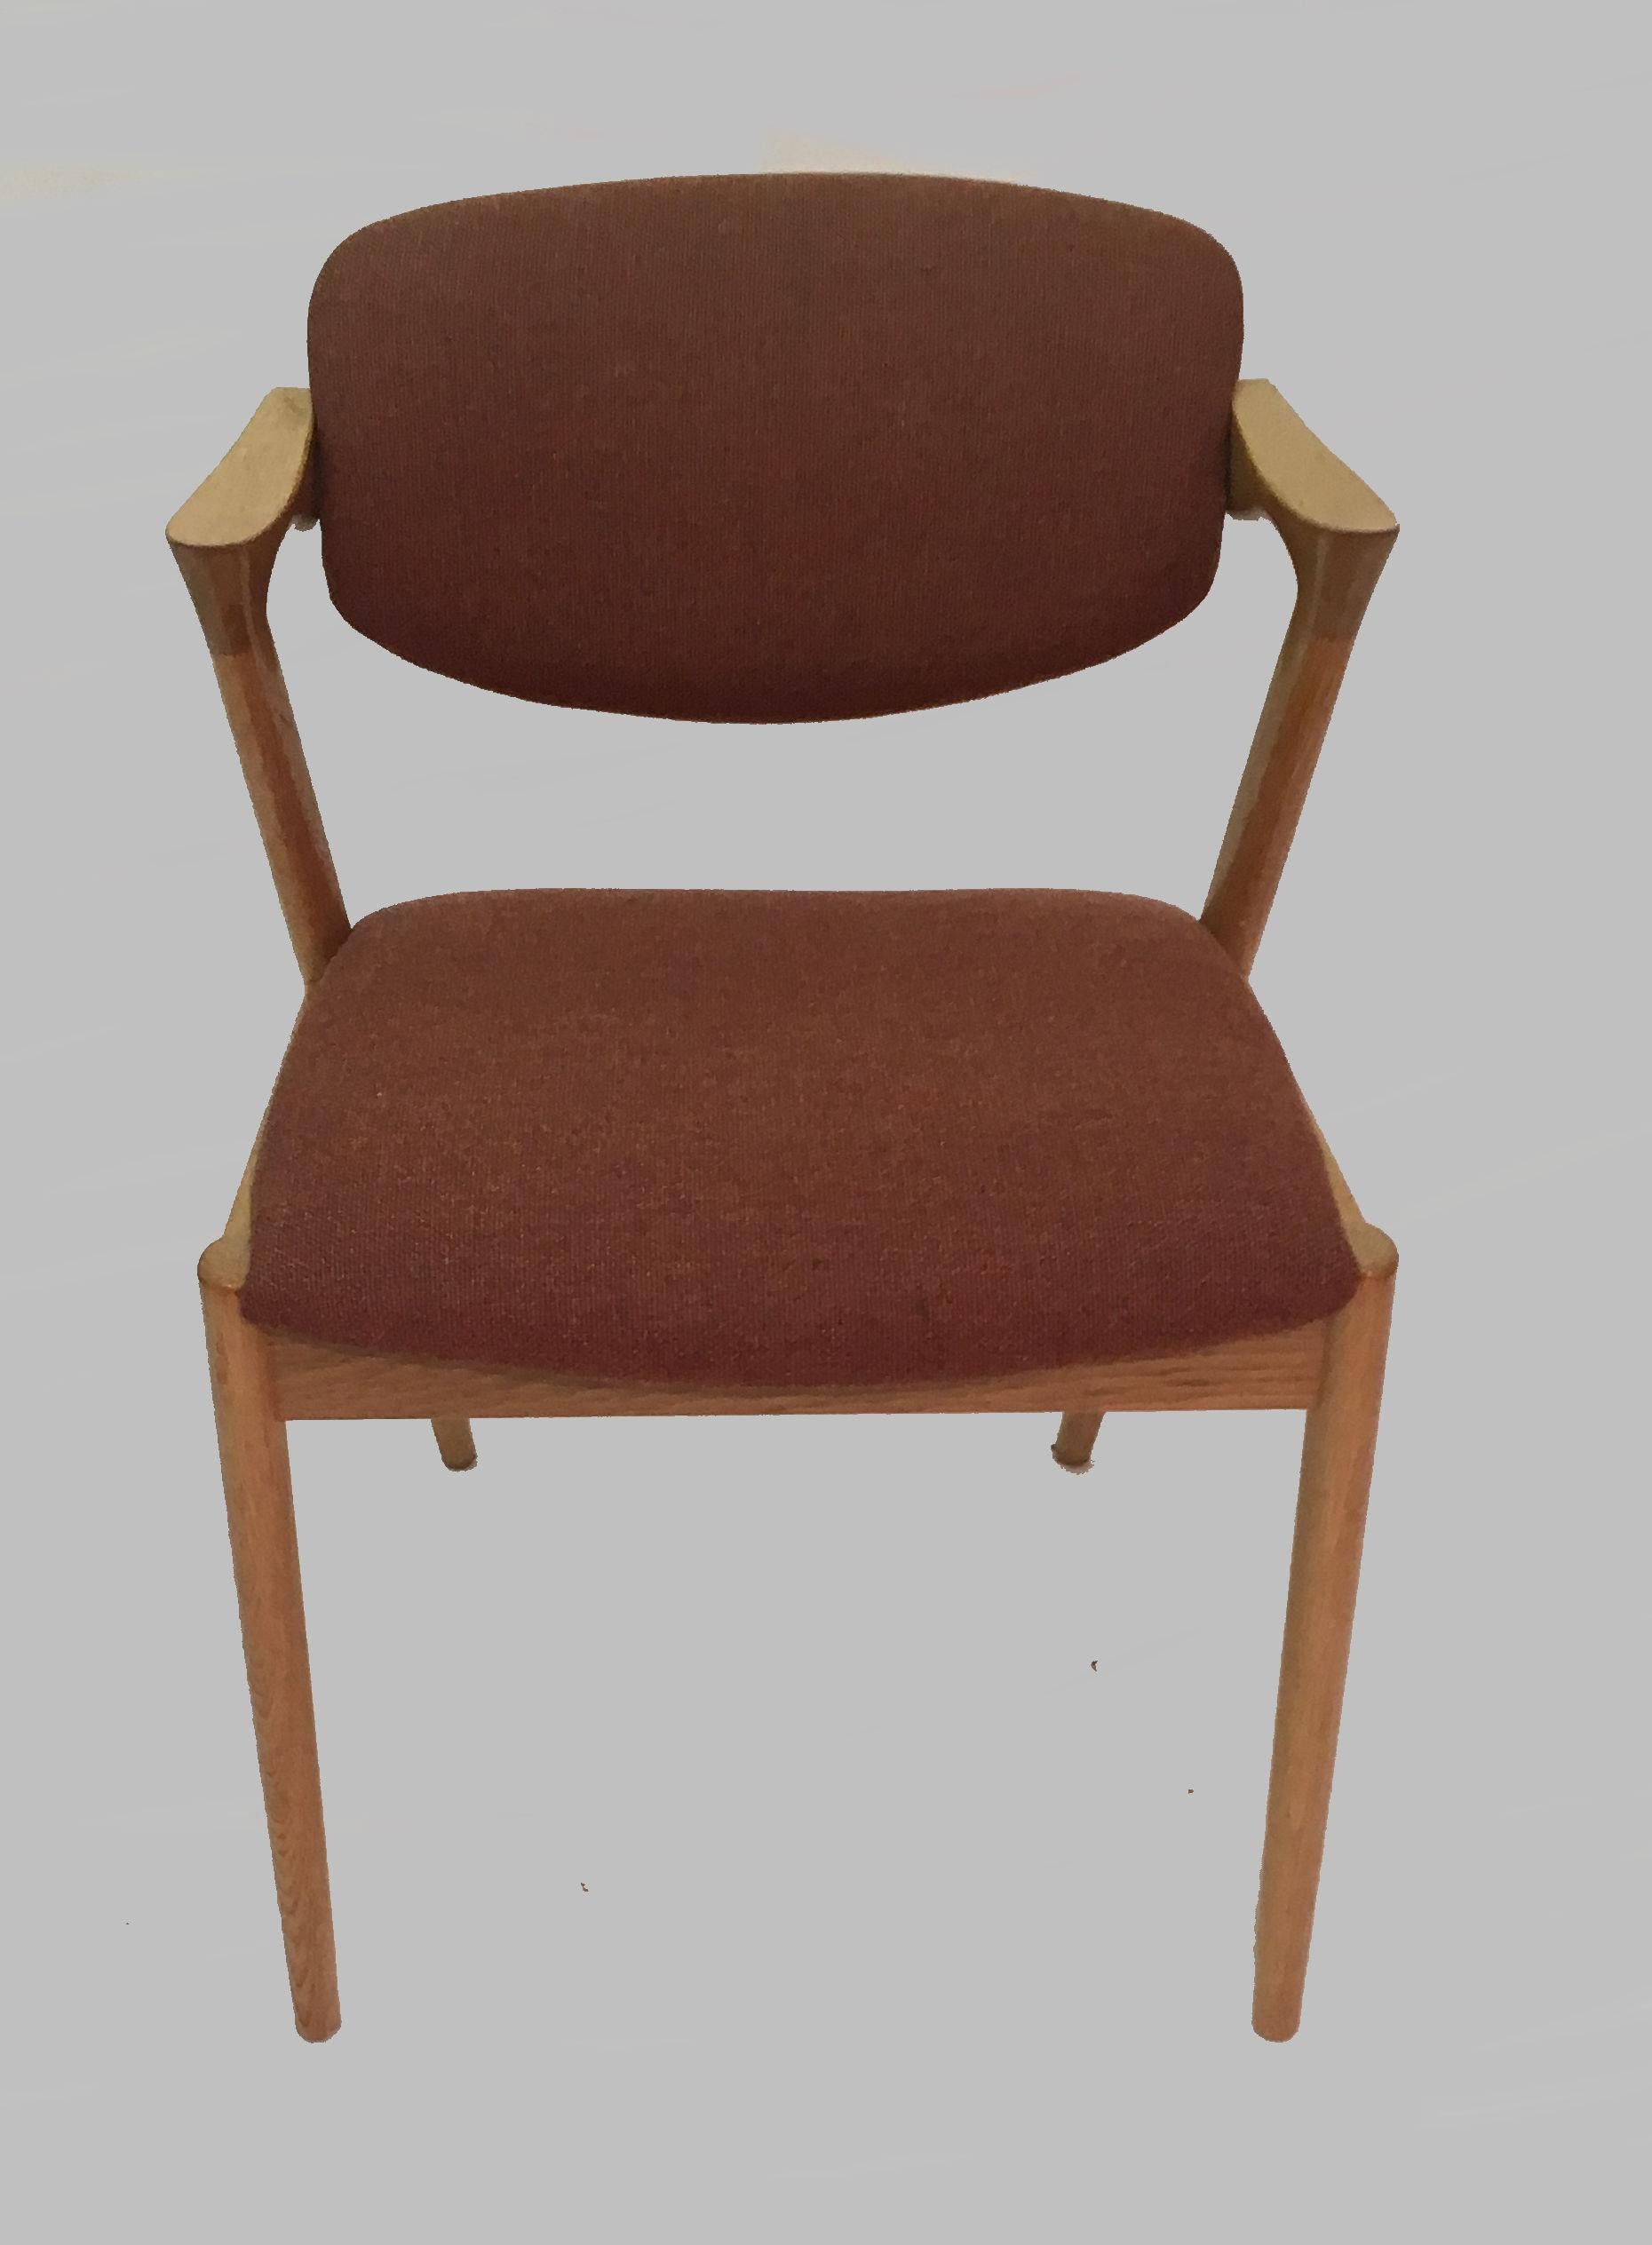 Set of four restored dining chairs in oak with adjustable backrest by Kai Kristiansen for Schous Møbelfabrik.

The chairs have Kai Kristiansens typical light and elegant design that make them fit in easily where you want them in your home, a